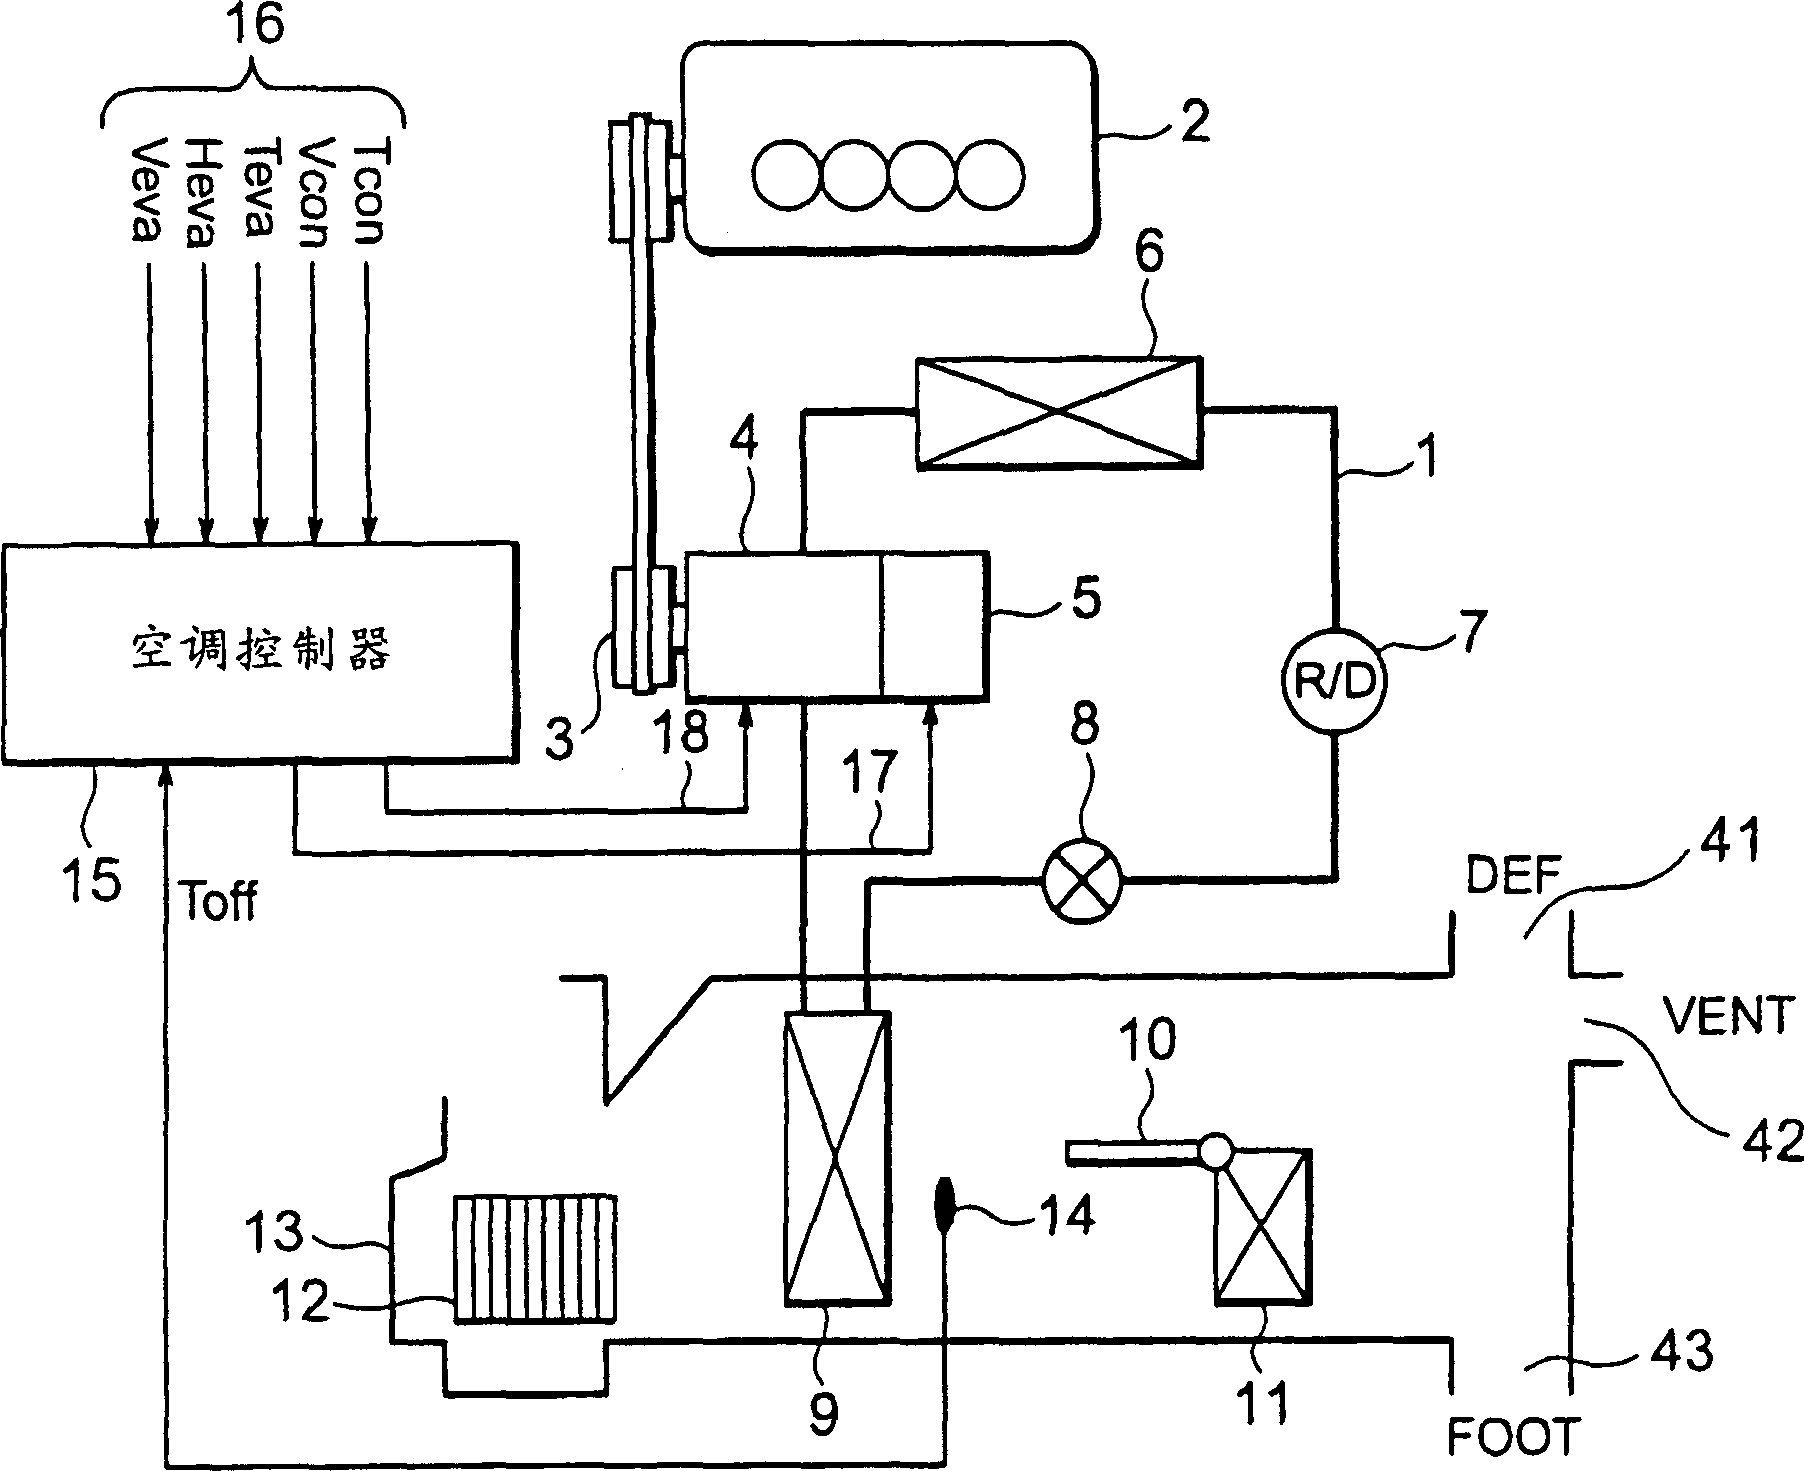 Motor-vehicle airconditioner using mixed compressor